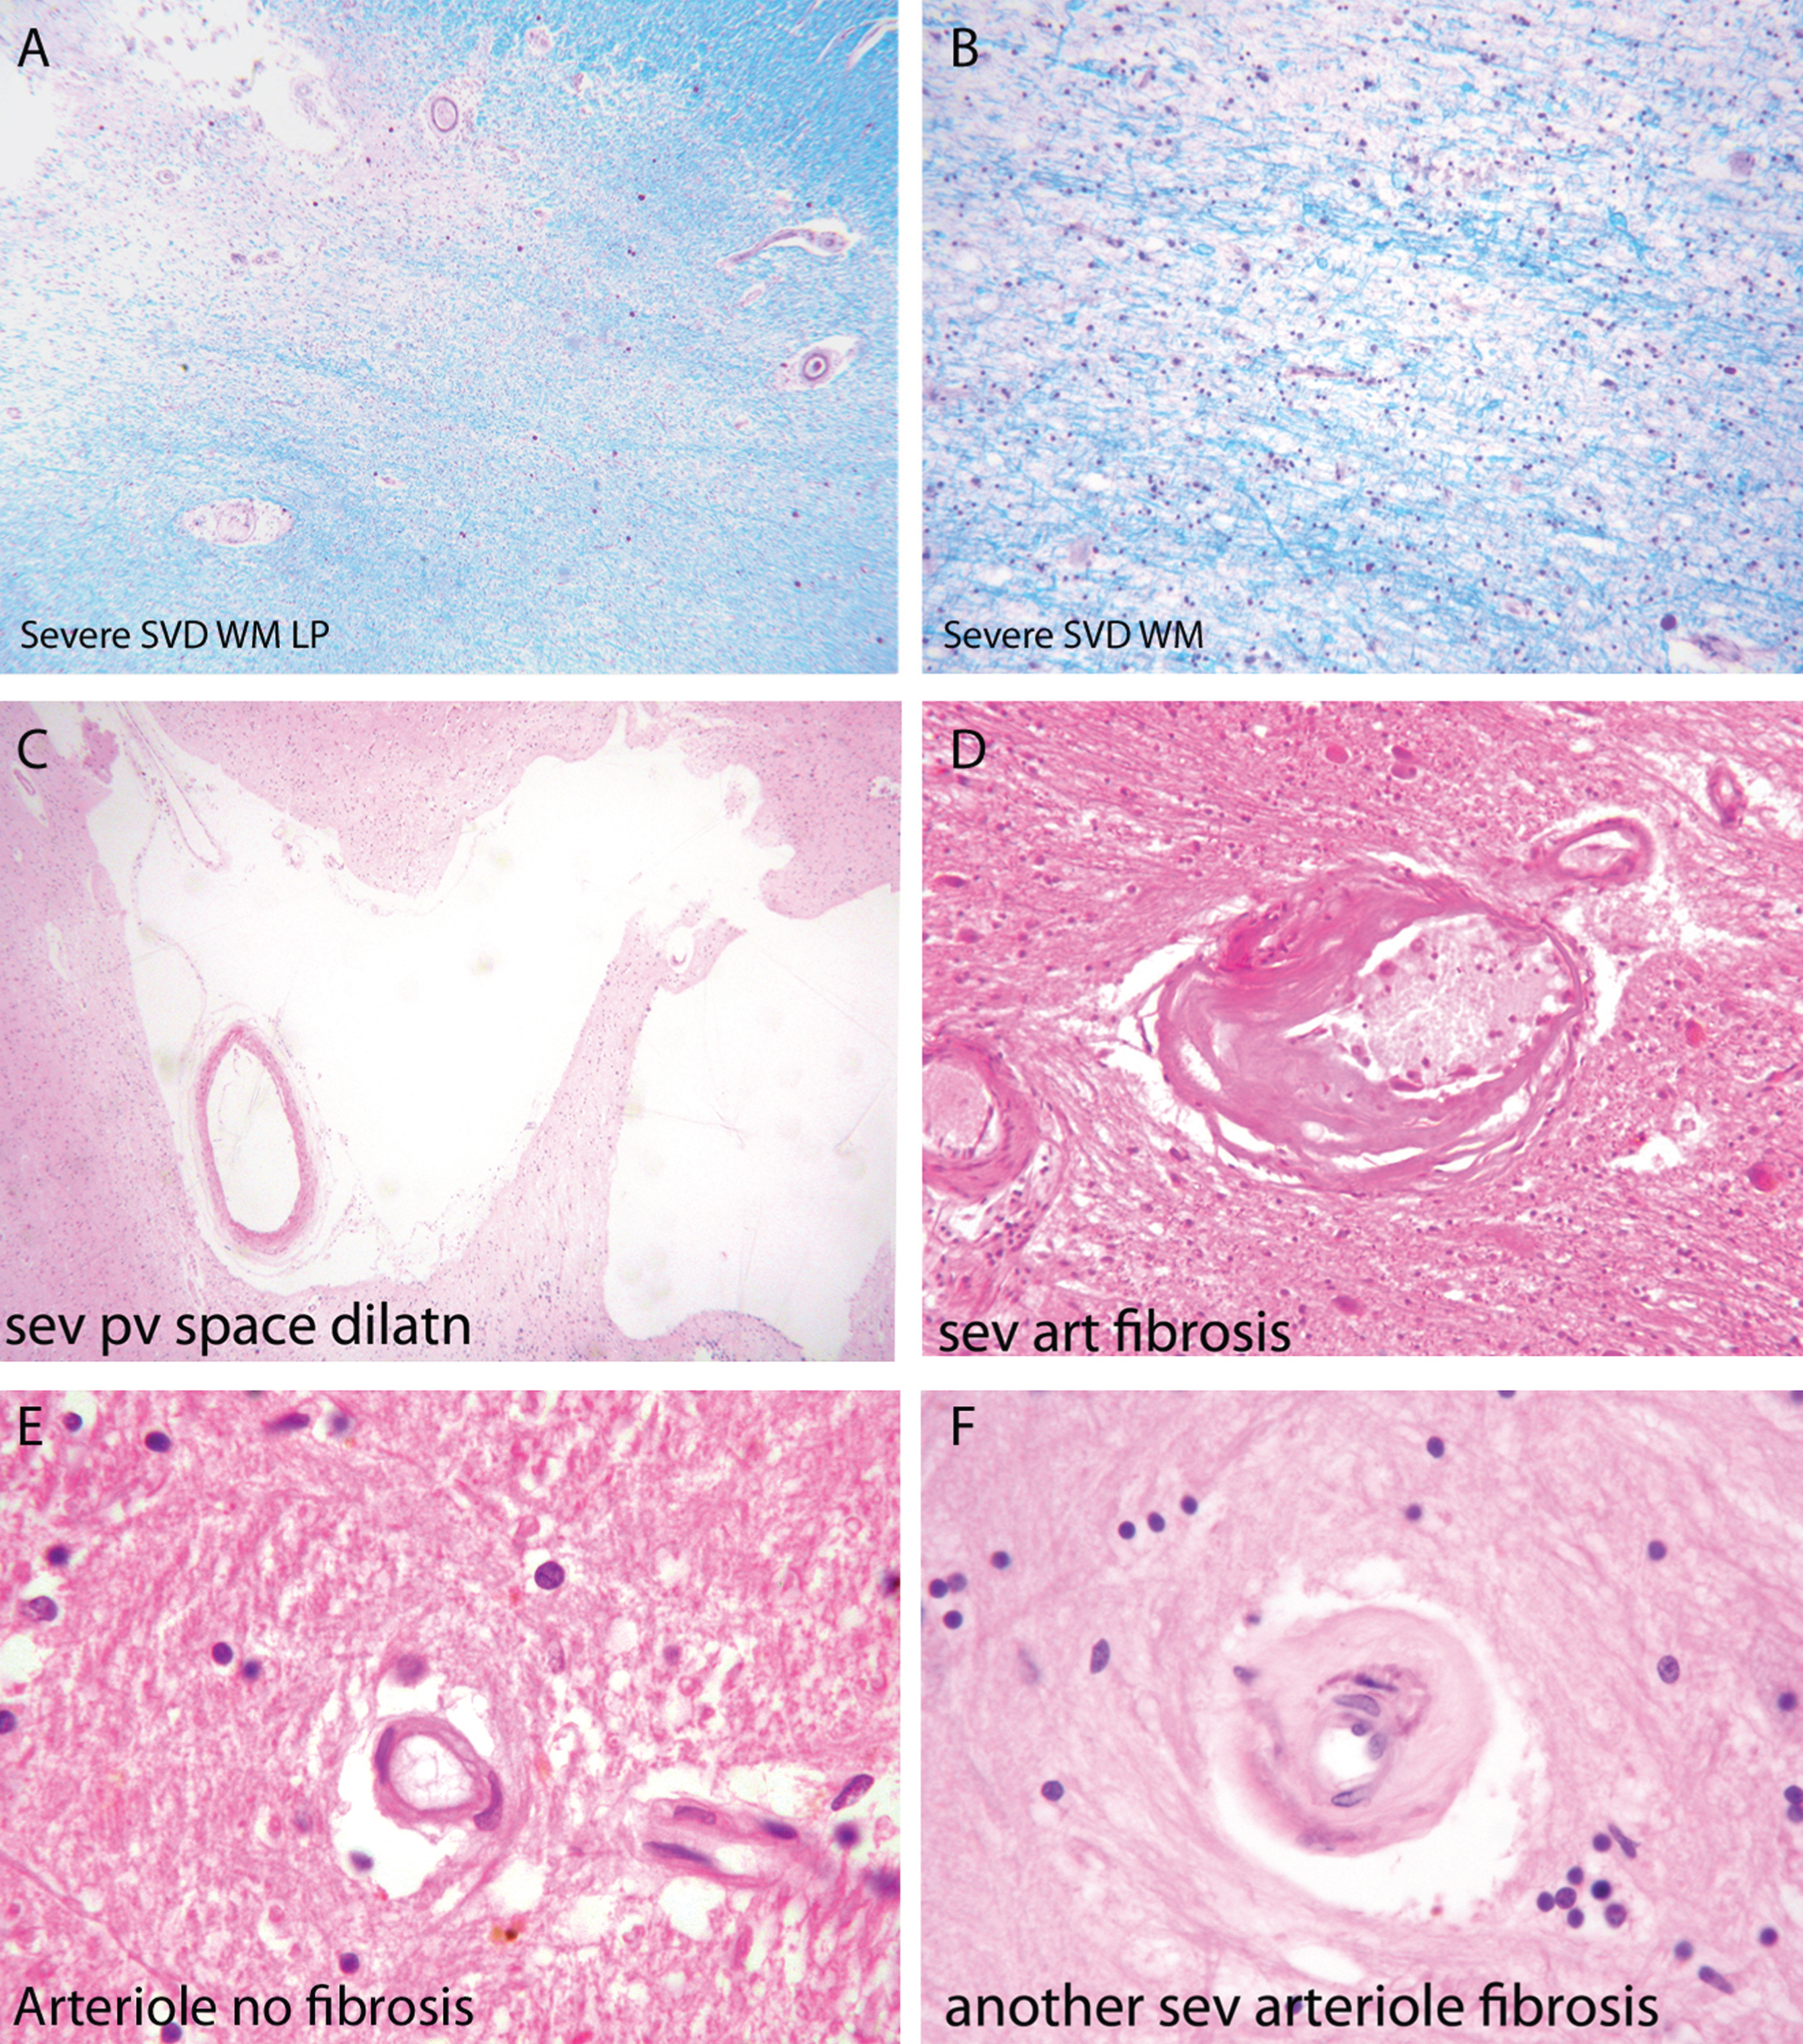 Components of the pathology due to SSVD. A, B) Low power (A) and higher power (B) views of a histological section from a case of SSVD. The section has been stained for myelin (blue) (Luxol fast blue/cresyl violet stain). There is diffuse pallor of staining and, at the top left corner of the section in (A), the tissue is necrotic. B) Damaged white matter at higher power. The nuclei (purple) are chiefly those of infiltrating macrophages. C) Greatly dilated perivascular space (hematoxylin and eosin stain). D) Small artery with a grossly thickened wall in which collagen has replaced smooth muscle (hematoxylin and eosin stain). E) Normal white matter arterioles in which the deeper pink cells are smooth muscle cells. F) Severely fibrotic and stenosed arteriole from a case of SSVD (E and F, hematoxylin and eosin).